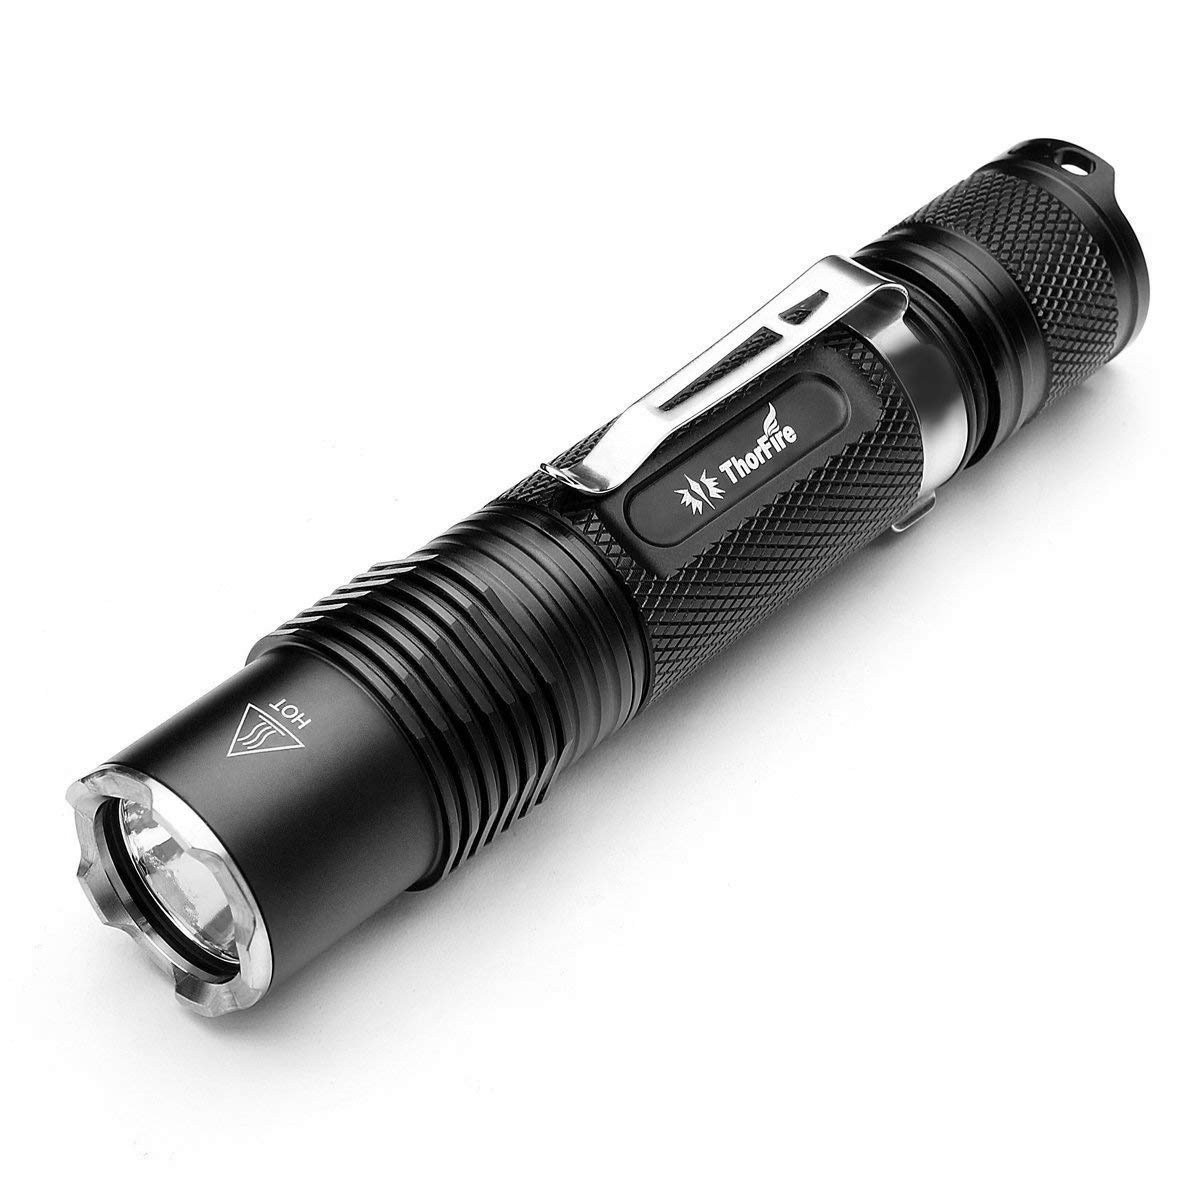 Book Cover Thorfire 18650 Flashlight, 1070 Lumen Led Light with 5 Modes, Pocket Sized VG15S Perfect for EDC (Battery Not Included)